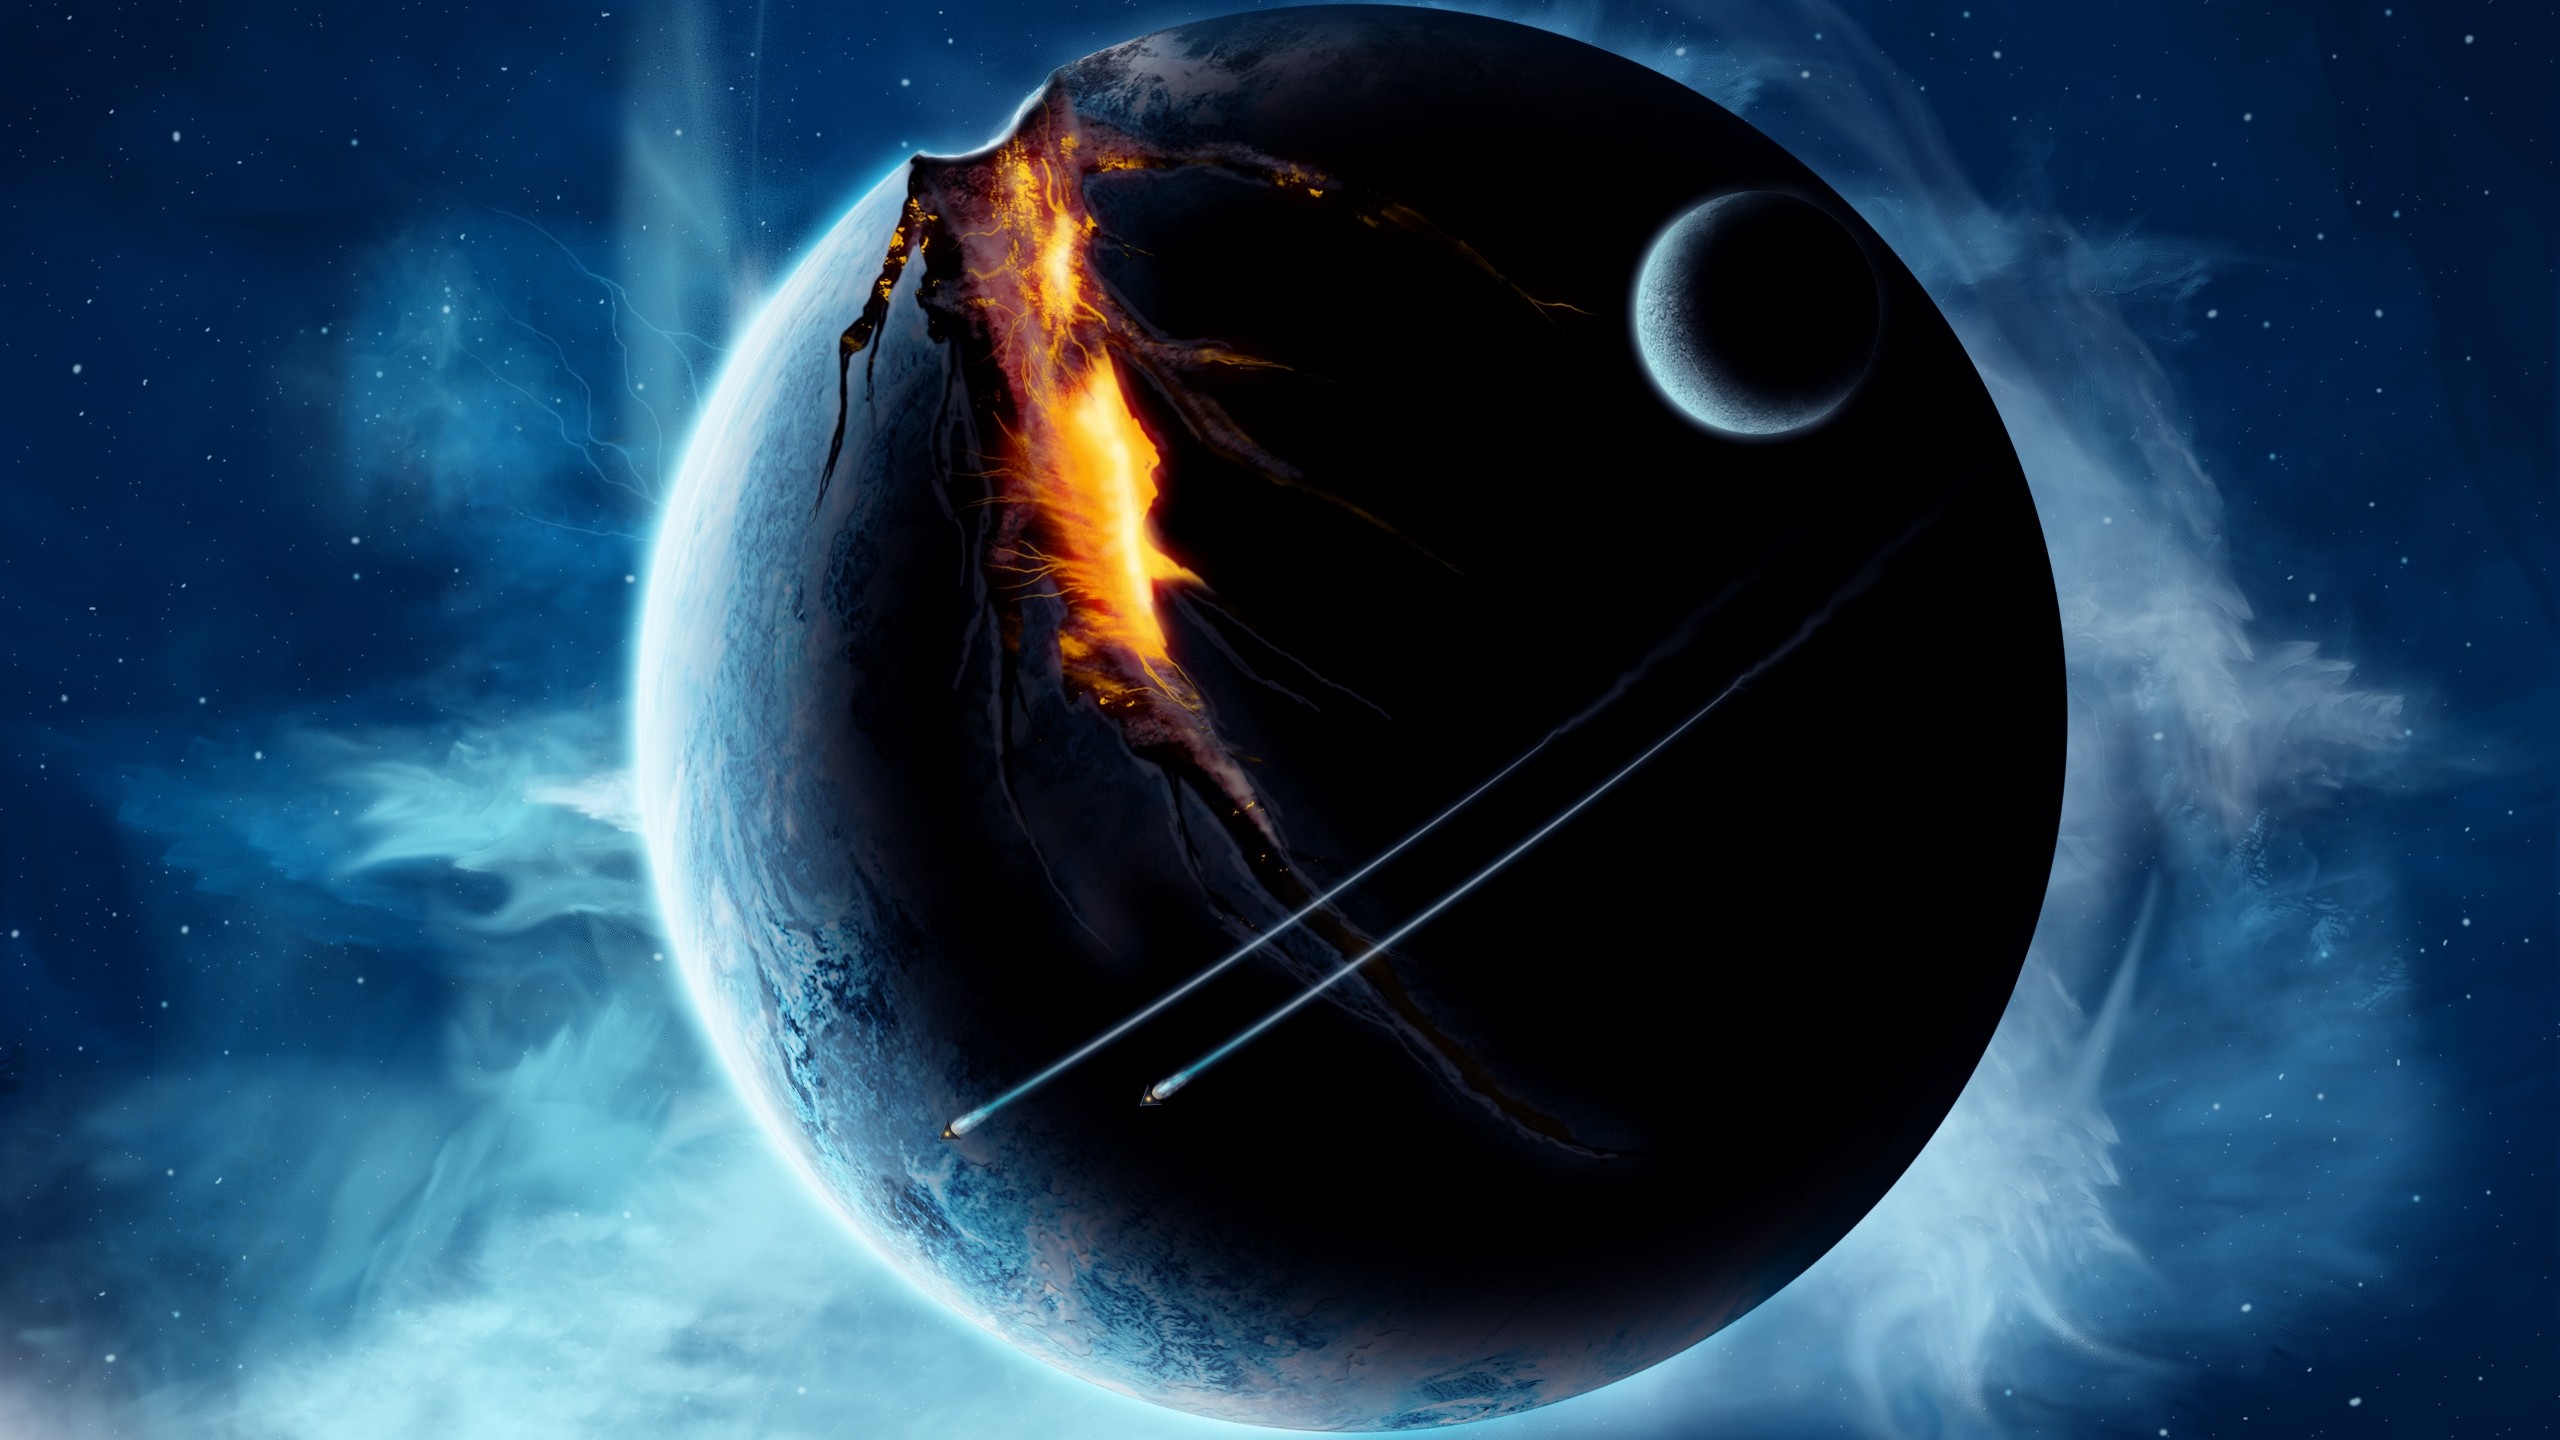 outer, Space, Planets, Broken, Spaceships Wallpaper